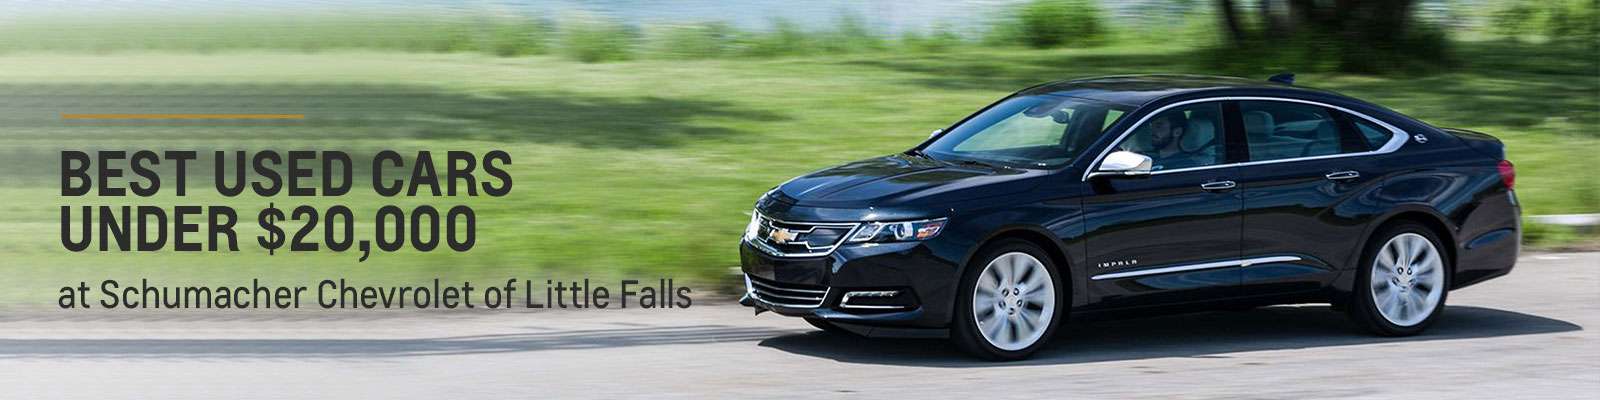 Best Used Cars Under $20,000 at Schumacher Chevrolet of Little Falls